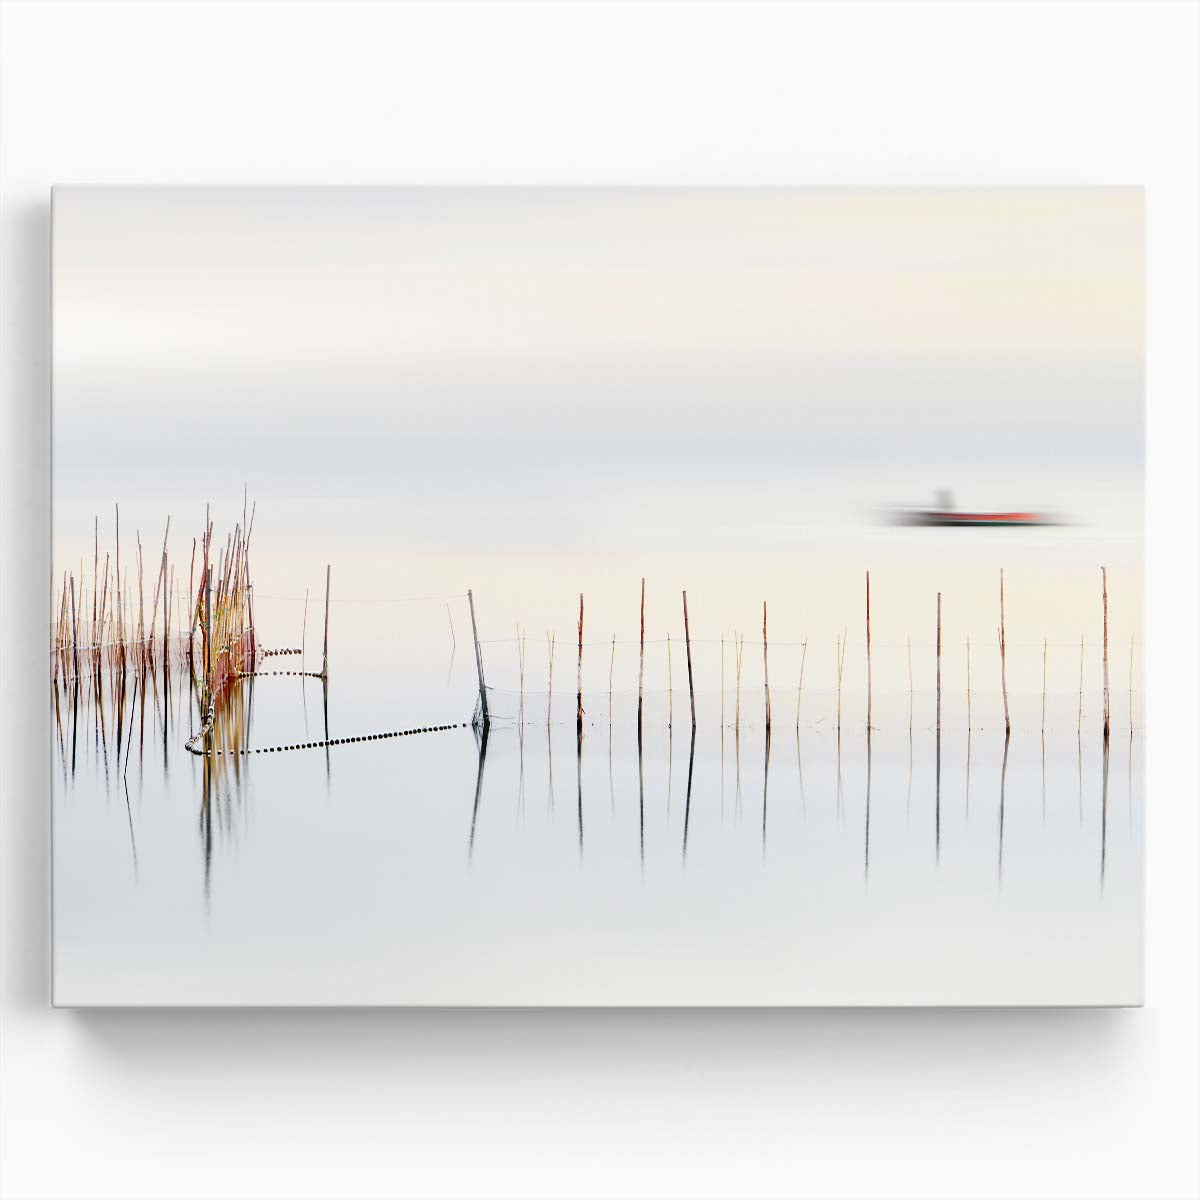 Seascape Fishing Boats Panoramic Wall Art by Luxuriance Designs. Made in USA.